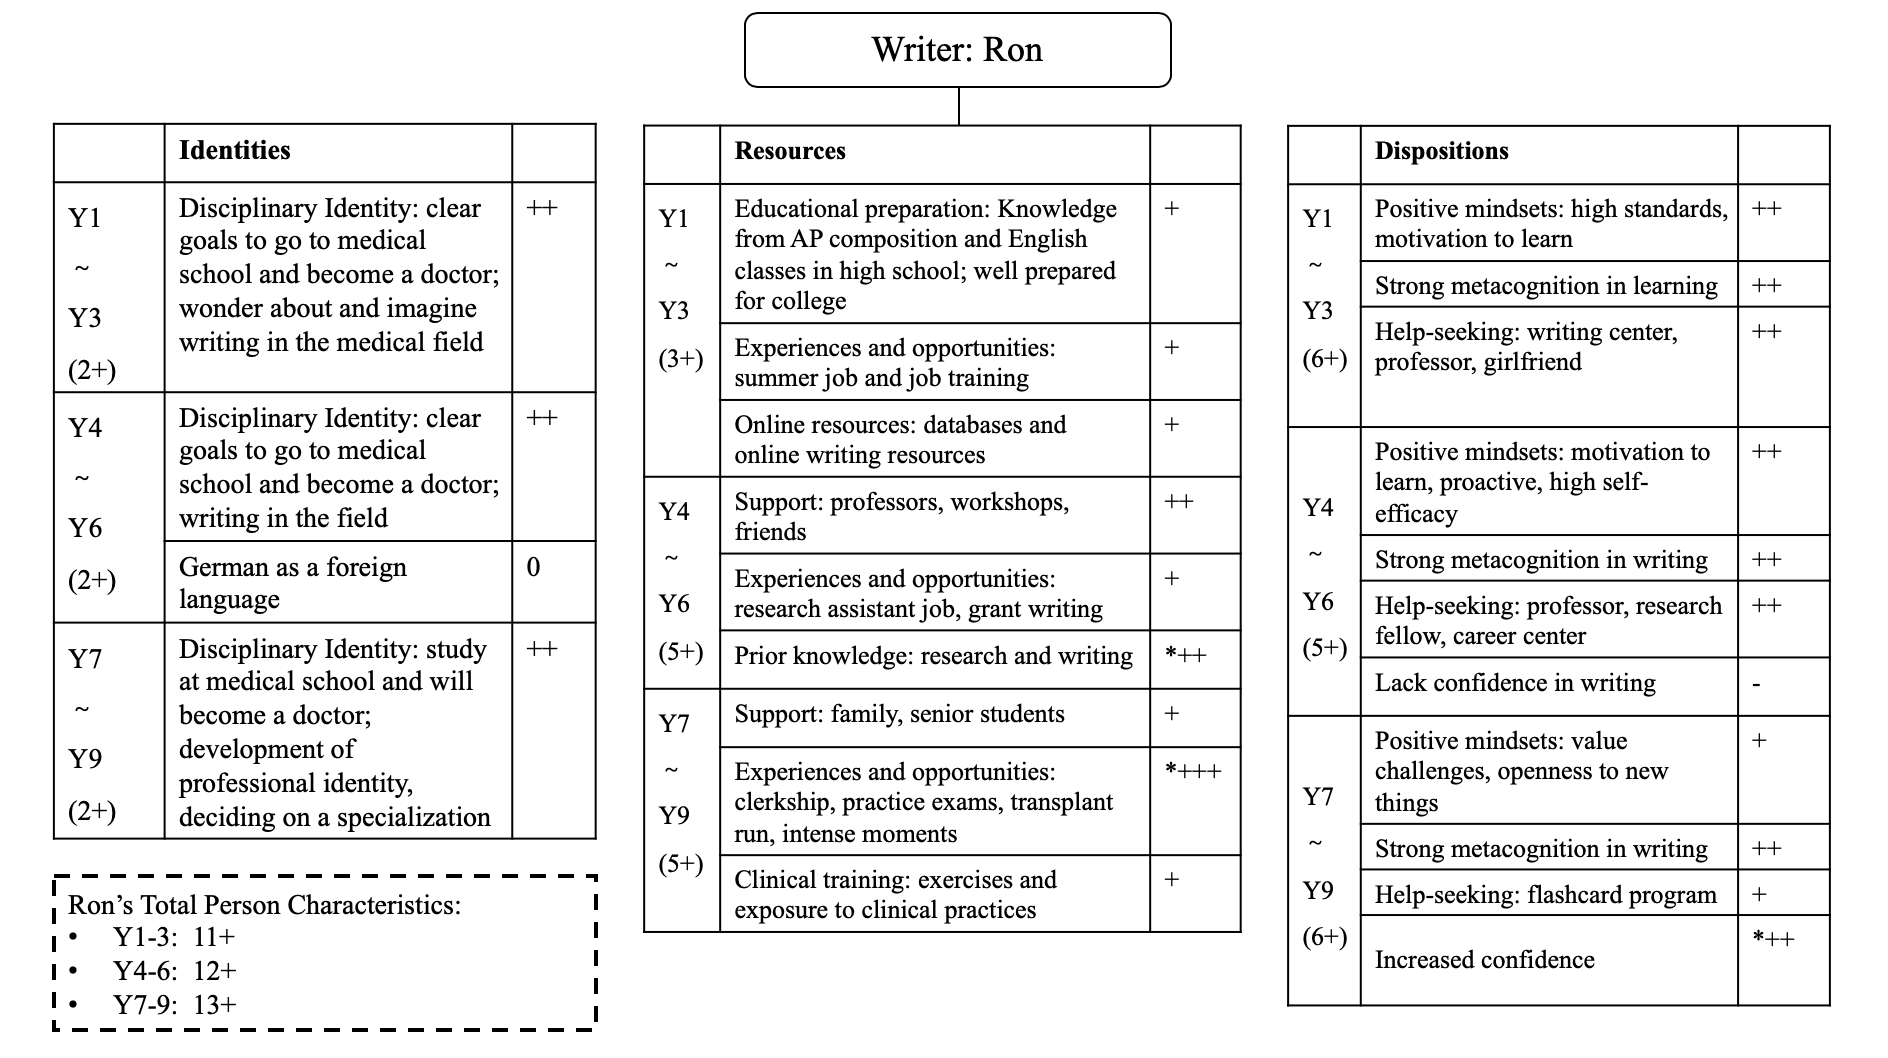 This figure shows an overview of Ron's Person characteristics. A rectangle on the top center represents Ron the writer, which is connected with lines to three rectangular boxes beneath it. Each box is a table of Ron's person characteristics with three columns, listing year periods, specific person characteristics, and minuses or pluses. The rectangular box on the left is marked with 'Identities,' under which Ron's identities are listed within three three-year periods of time. The period of Year 1 to Year 3 is marked with two pluses and corresponds to one set of identities, i.e., 'Disciplinary Identity: Clear goals to go to medical school and become a doctor, wonder about and imagine writing in the medical field' with two pluses. The period of Year 4 to Year 6 is marked with two pluses and corresponds to two sets of identities, i.e., 'Disciplinary Identity: Clear goals to go to medical school and become a doctor, writing in the field' with two pluses and 'German as a foreign language' with zero. The period of Year 7 to Year 9 is marked with two pluses and corresponds to one set of identities, i.e., 'Disciplinary Identity: study at medical school and will become a doctor, development of professional identity, deciding on a specialization' with two pluses. The rectangular box in the middle is marked with 'Resources,' under which Ron's resources are listed within three three-year periods of time. The period of Year 1 to Year 3 is marked with one plus and corresponds to three sets of resources, including 'Educational preparation: Knowledge from AP composition and English classes in high school, well prepared for college' with one plus; 'Experiences and opportunities: summer job and job training' with one plus; 'Online resources: databases and online writing resources' with one plus. Then, the period of Year 4 to Year 6 is marked with five pluses and corresponds to three sets of resources, including 'Support: professors, workshops, friends' with two pluses; 'Experiences and opportunities: research assistant job, grant writing' with one plus; 'Prior knowledge: research and writing' with two pluses and an asterisk. The period of Year 7 to Year 9 is marked with five pluses and corresponds to three set of resources, including 'Support: family, senior students' with one plus; 'Experiences and opportunities: clerkship, practice exams, transplant run, intense moments' with three pluses and an asterisk; 'Clinical training: exercises and exposure to clinical practices' with one plus. The rectangular box on the right is marked with 'Dispositions,' under which Ron's dispositions are listed within three three-year periods of time. The period of Year 1 to Year 3 is marked with six pluses and corresponds to three sets of dispositions, including 'Positive mindsets: high standards, motivation to learn' with two pluses; 'Strong metacognition in learning' with two pluses; 'help-seeking: writing center, professor, girlfriend' with two pluses. Then, the period of Year 4 to Year 6 is marked with five pluses and corresponds to four sets of dispositions, including 'Positive mindsets: motivation to learn, proactive, high self-efficacy' with two pluses; 'Strong metacognition in writing' with two pluses; 'help-seeking: professors, research fellow, career center' with two pluses; 'Lack confidence in writing' with one minus. The period of Year 7 to Year 9 is marked with six pluses and corresponds to four sets of dispositions, including 'Positive mindsets: value challenges, openness to new things' with one plus; 'Strong metacognition in writing' with two pluses; 'help-seeking: flashcard program' with one plus; 'Increased confidence' with two pluses and an asterisk. In the bottom right corner is a rectangular box outlined with broken line, in which Ron's total person characteristics are listed with bullet points: 'Y1 to Y3: eleven pluses,' 'Y4 to Y6: twelve pluses,' and 'Y7 to Y9: thirteen pluses.'